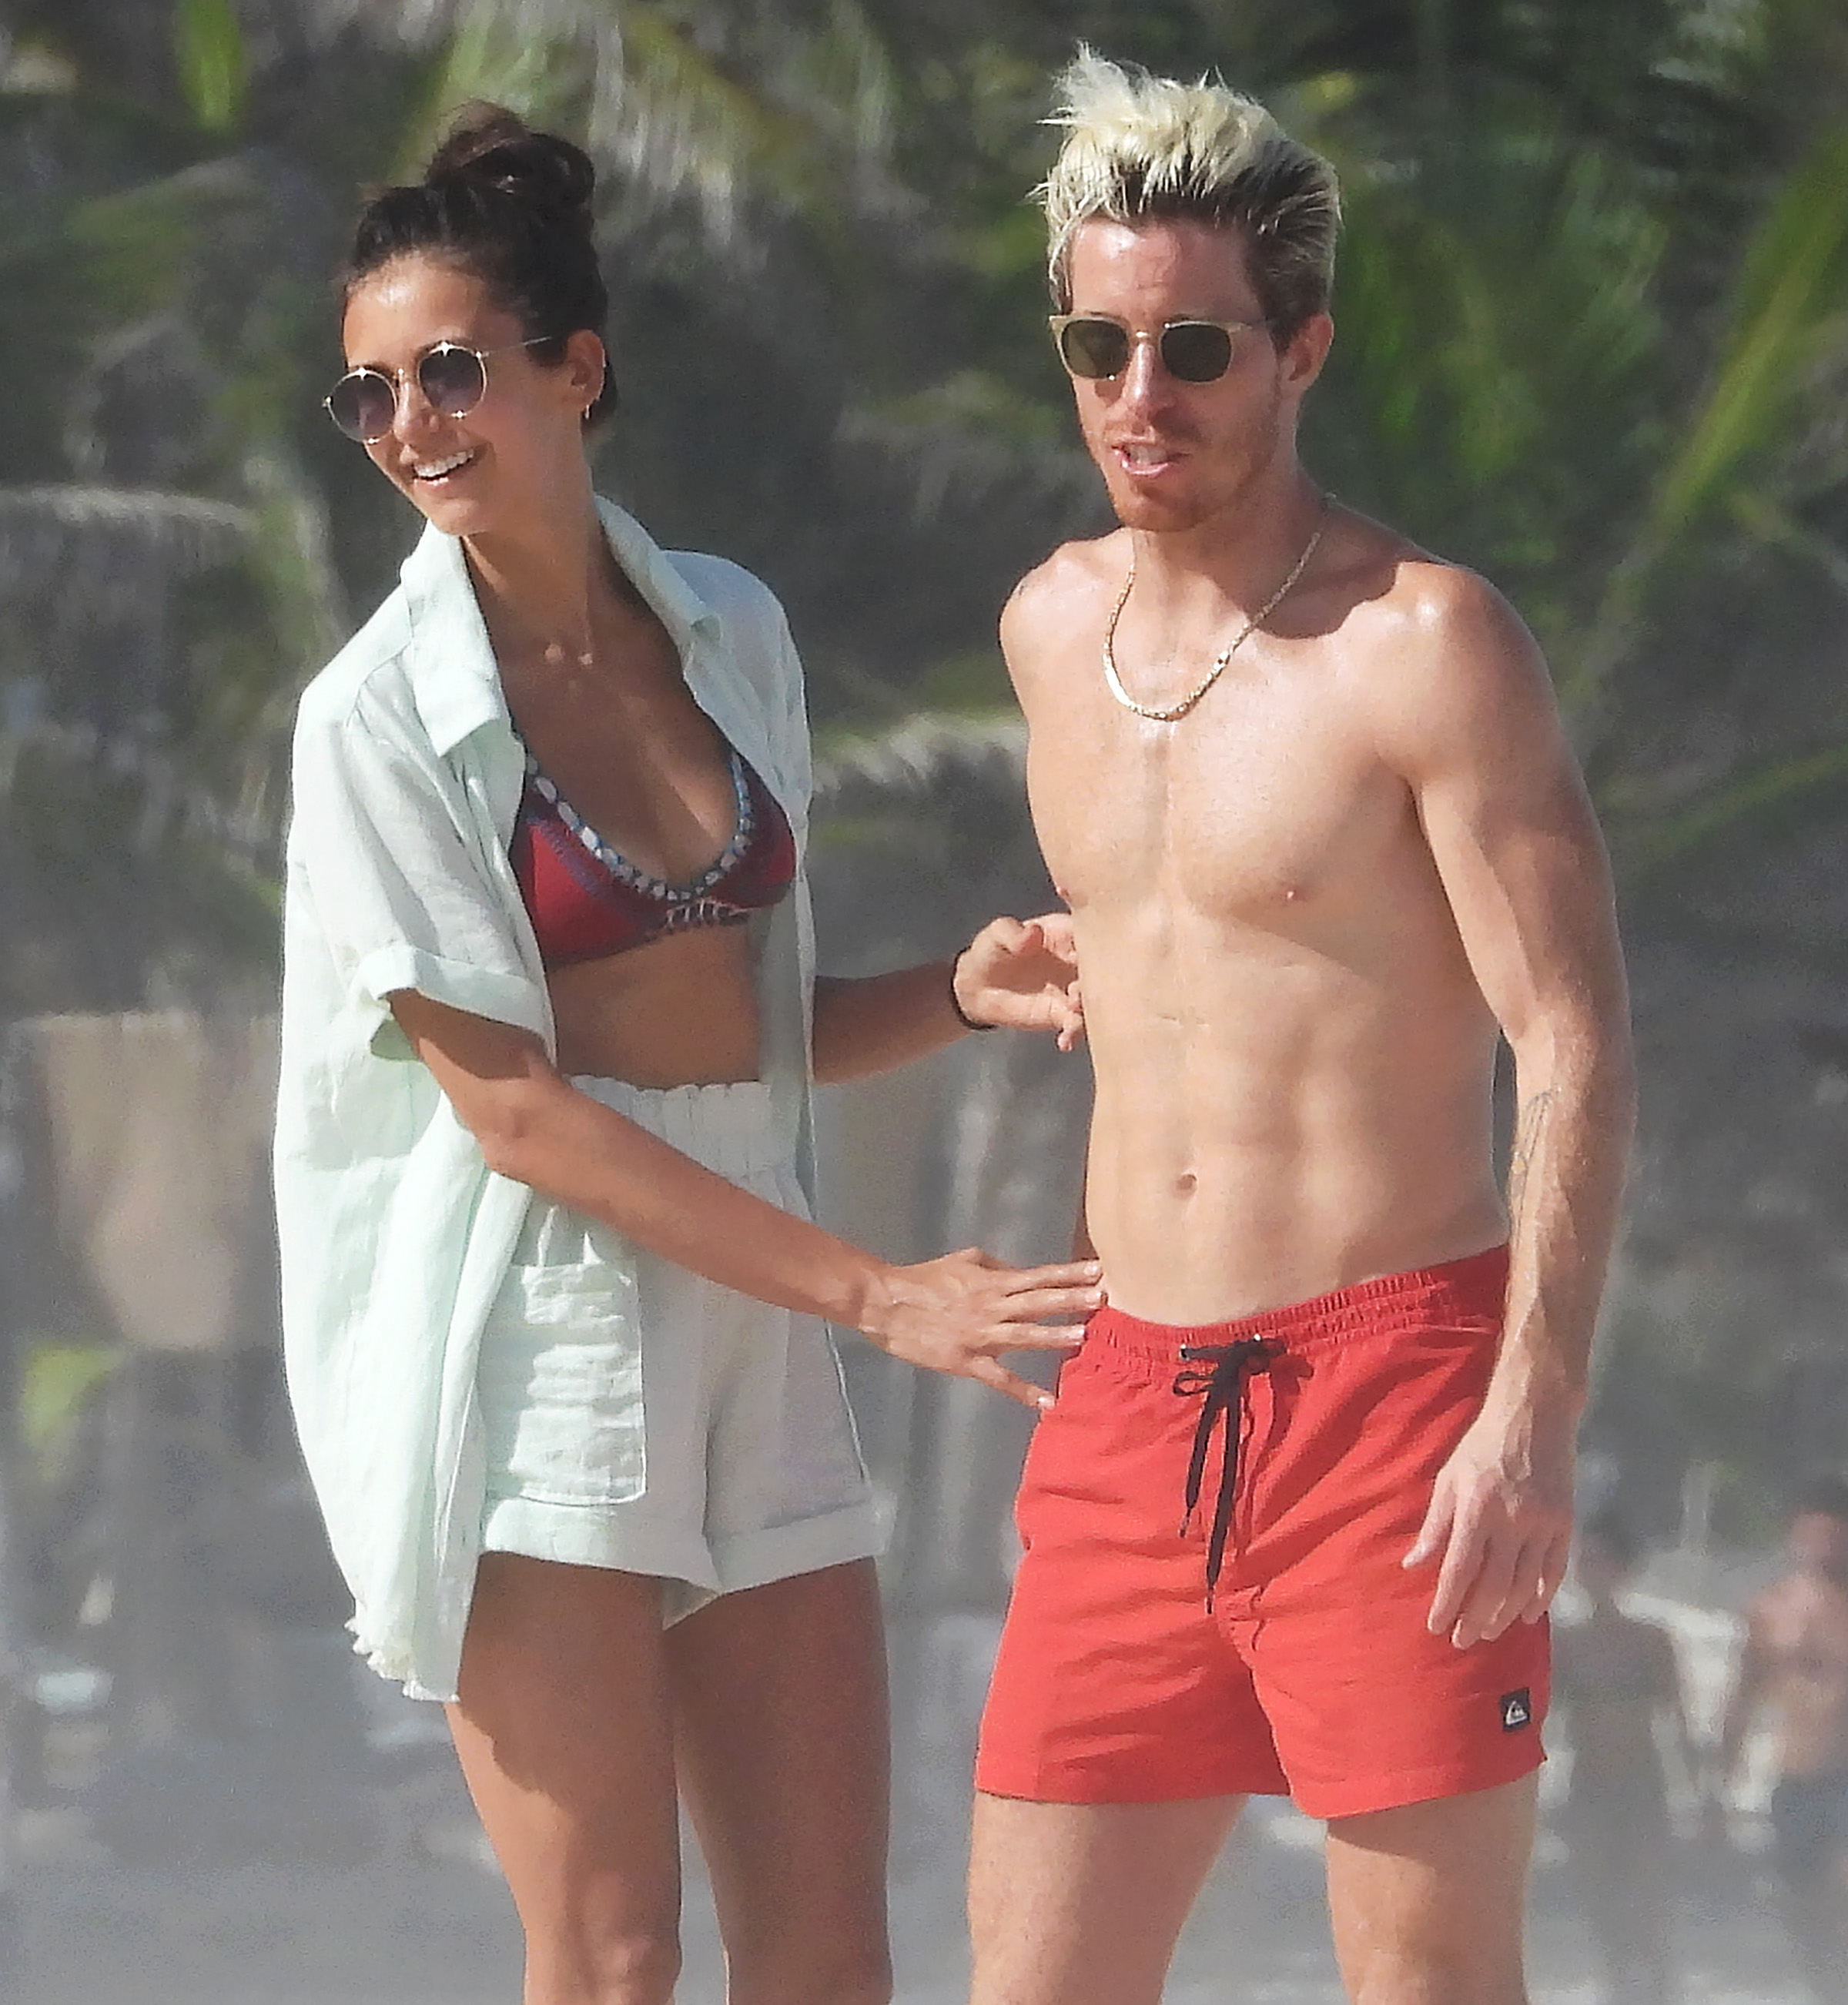 Nina Dobrev and boyfriend Shaun White put on a loved-up display in